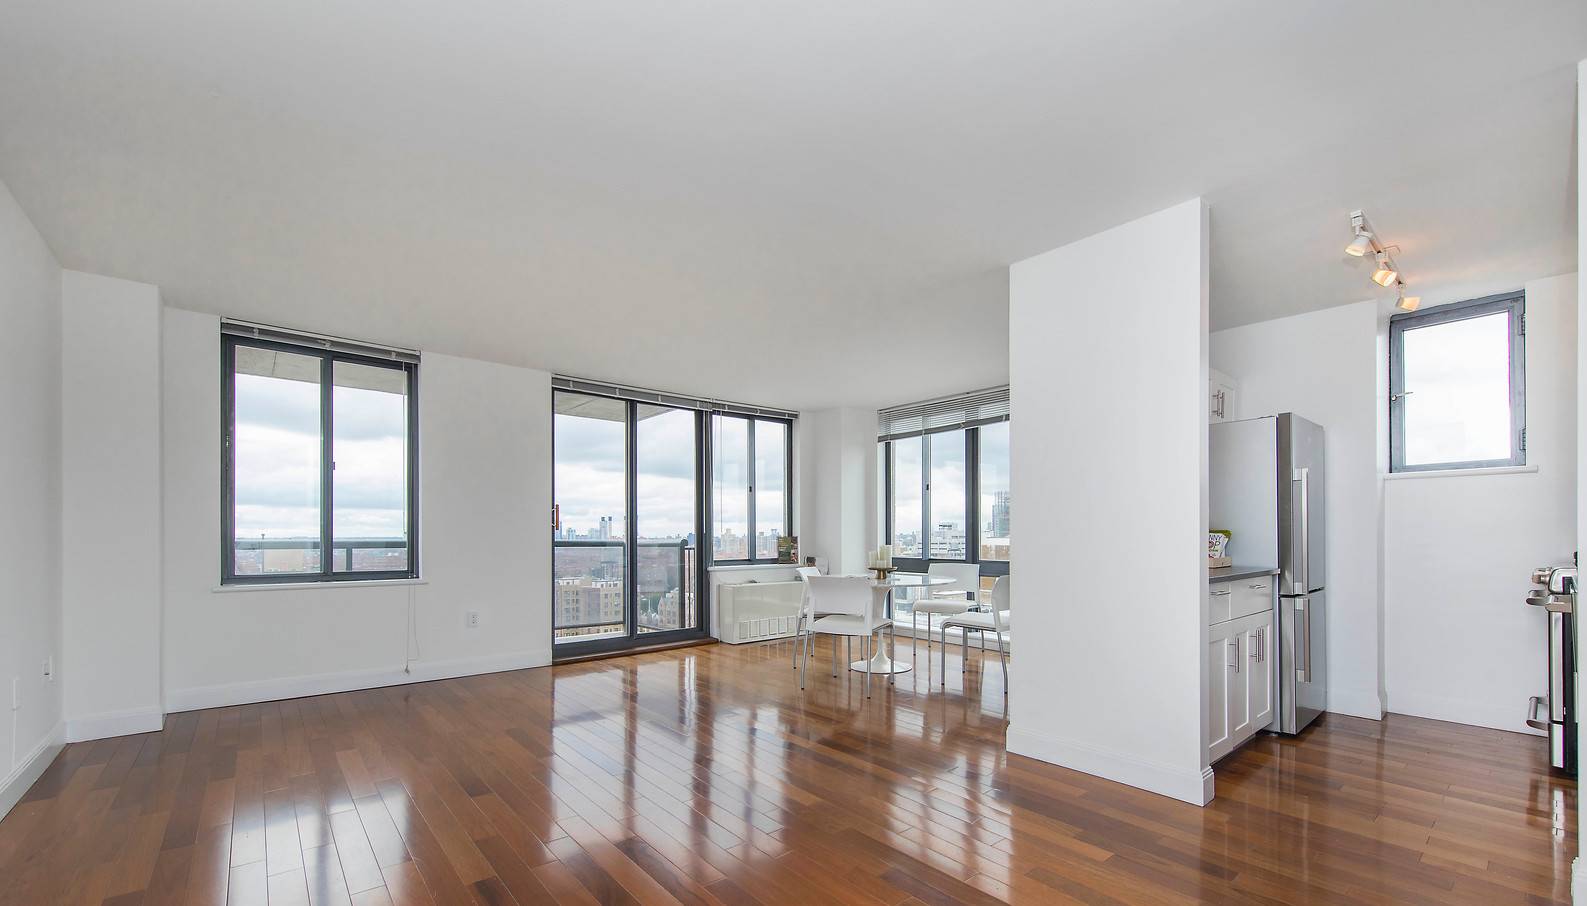 Glamorous Gramercy Park 2 Bedroom Apartment with 2 Baths featuring a Rooftop Deck and Gym